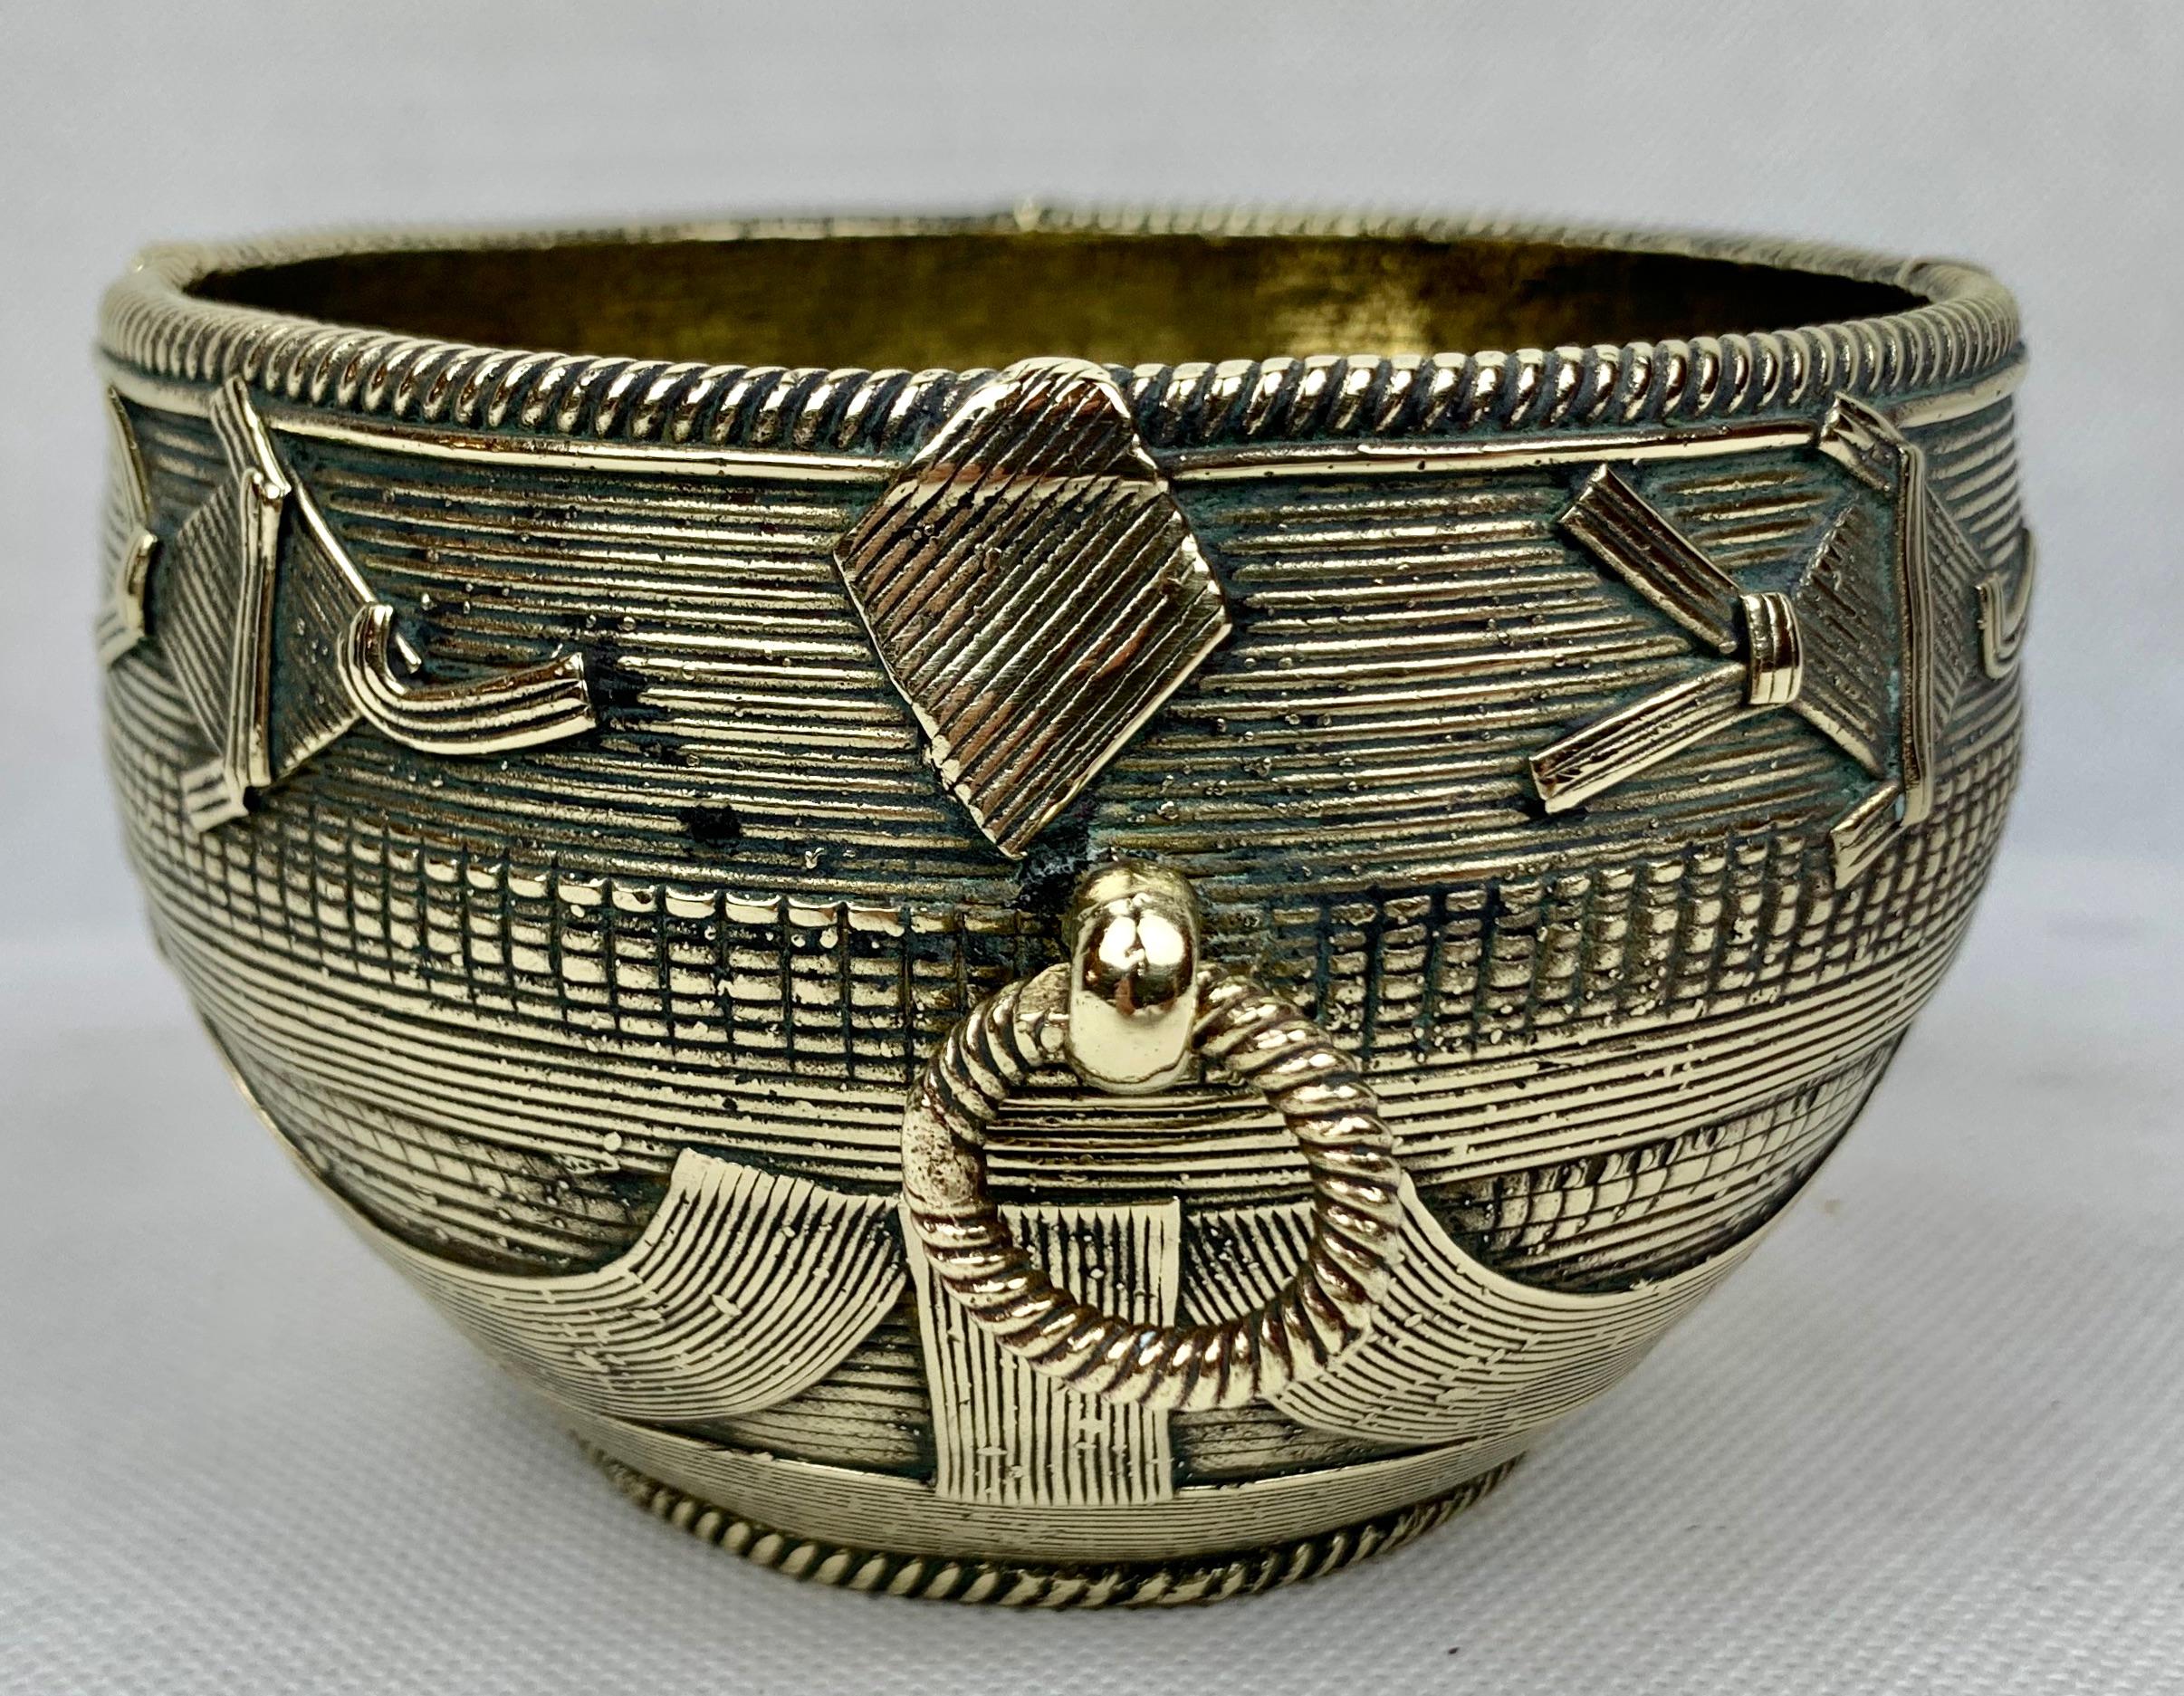 Ashanti vintage solid bronze bowl with ring handles. The bowl has great definition in the form of a basket. The top border has fish shapes just under the rim.
The Ashanti Akan people were known to work with bronze in the lost wax method.
Measures: